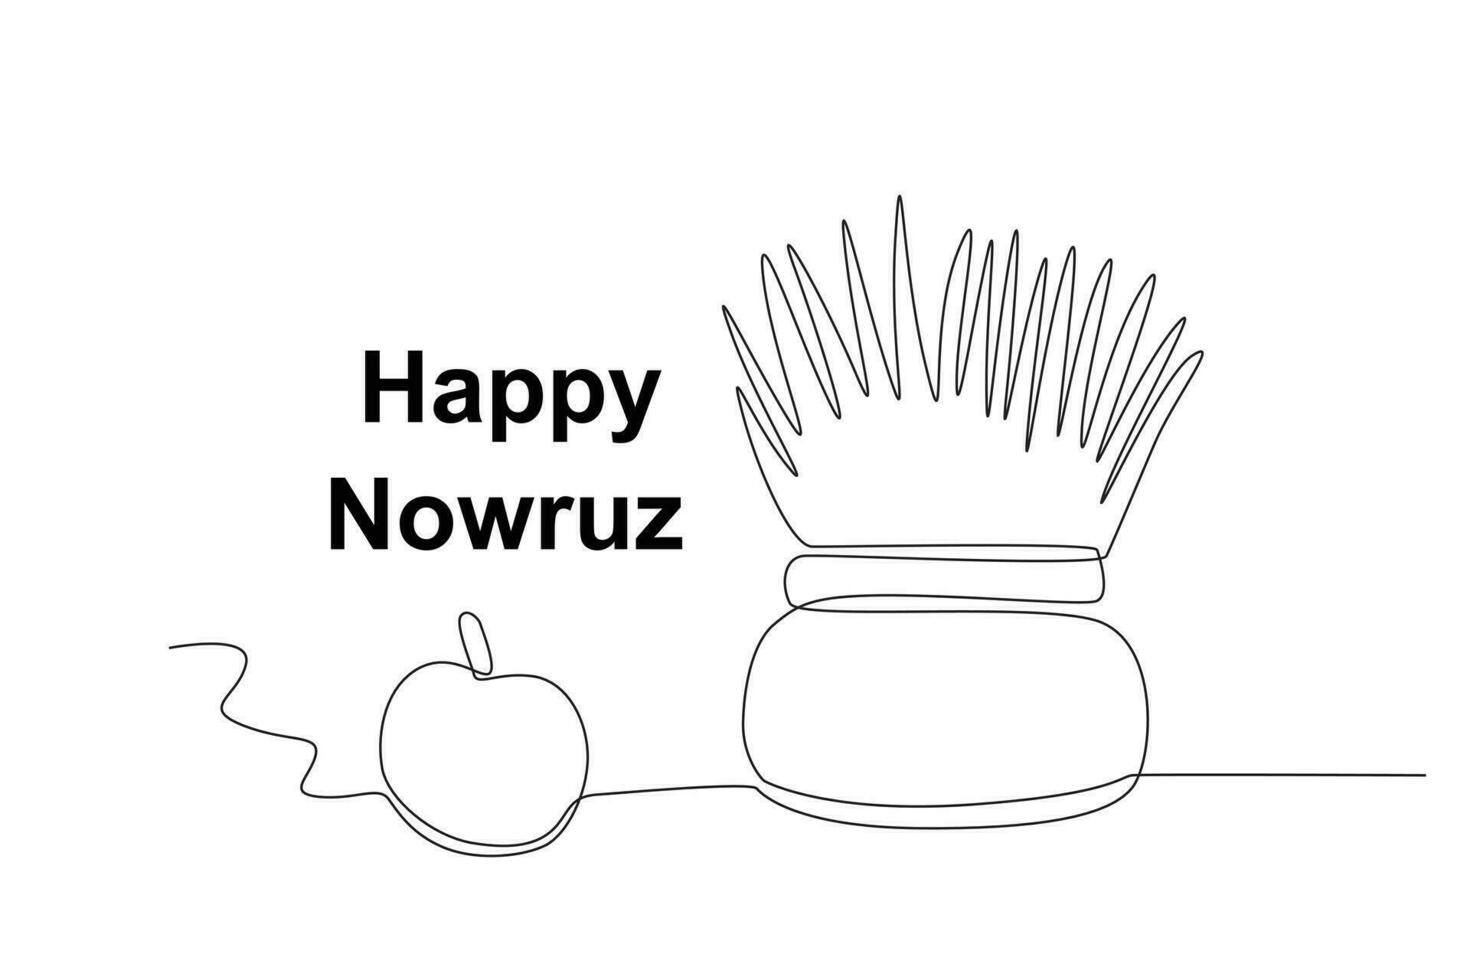 The symbols of the Nowruz celebration are apples and rice vector